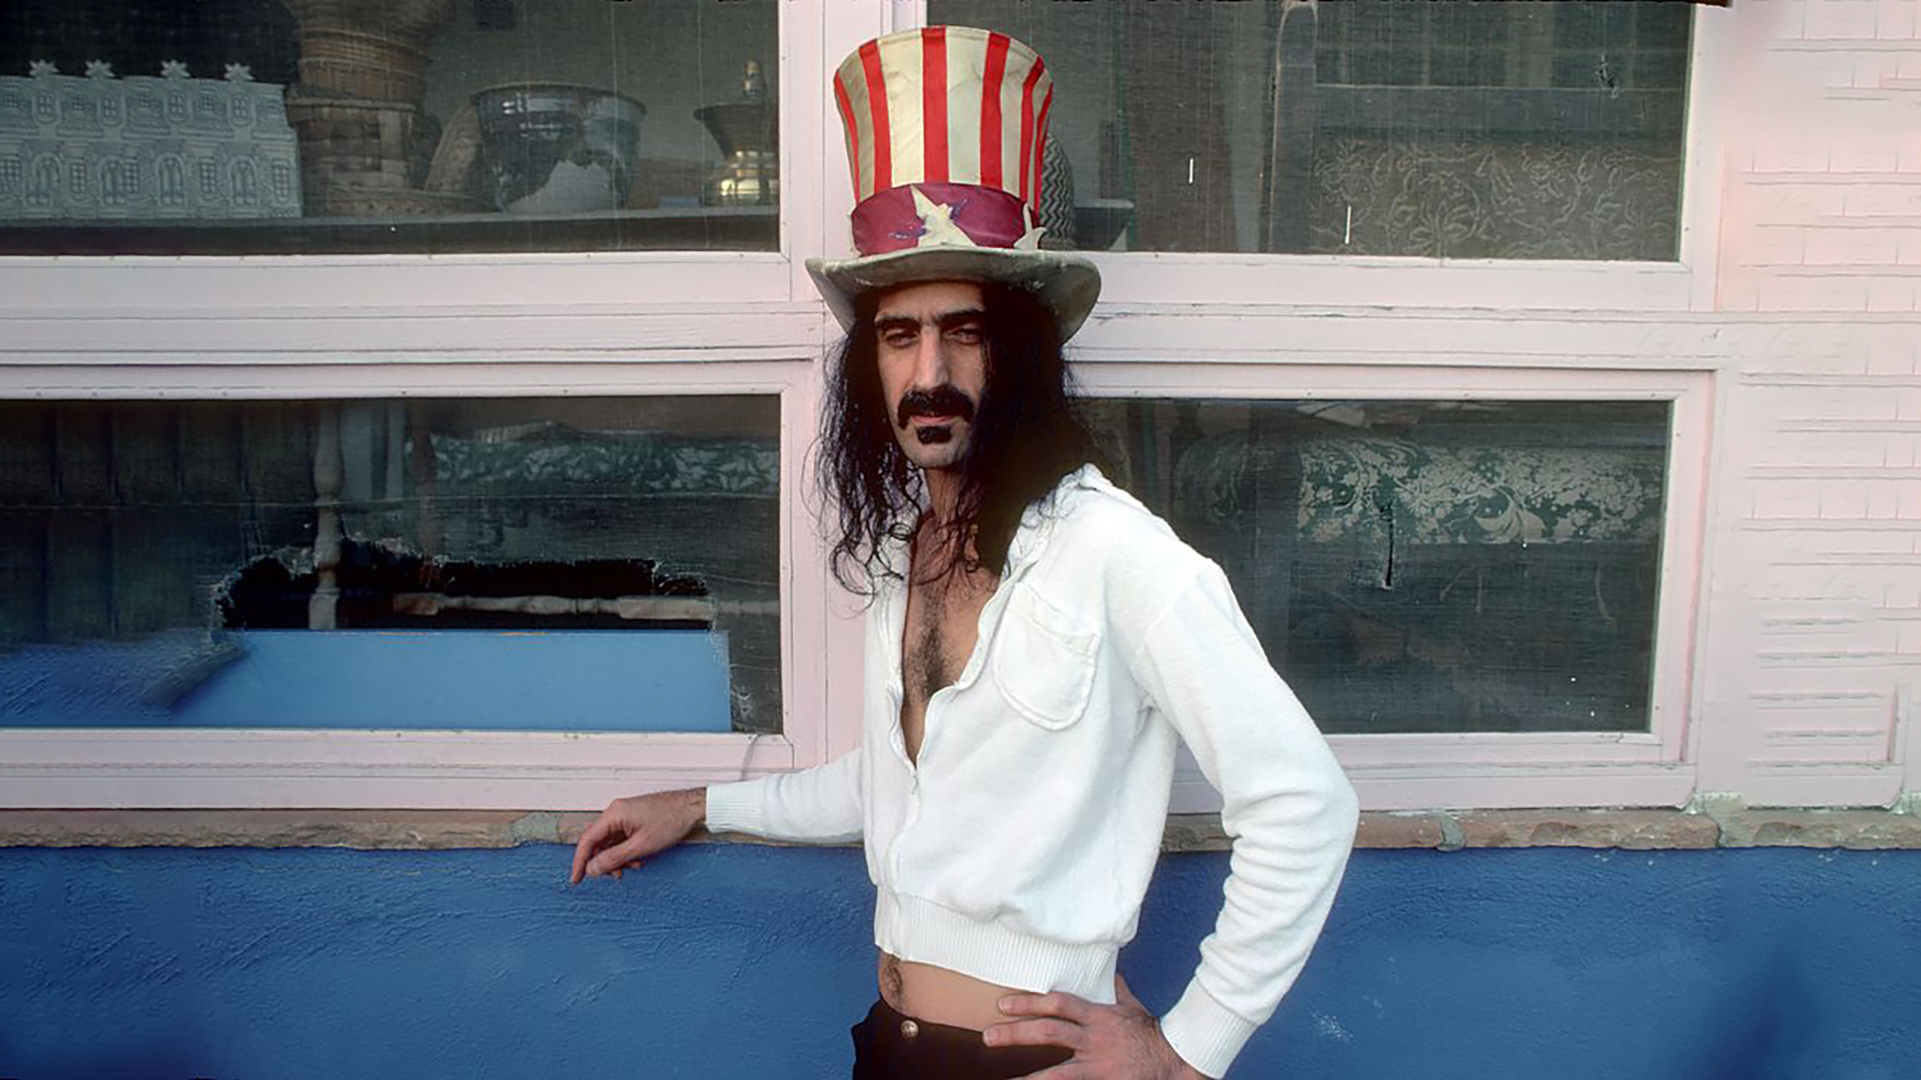 Frank Zappa in an American flag hat, March 1979 in Los Angeles.